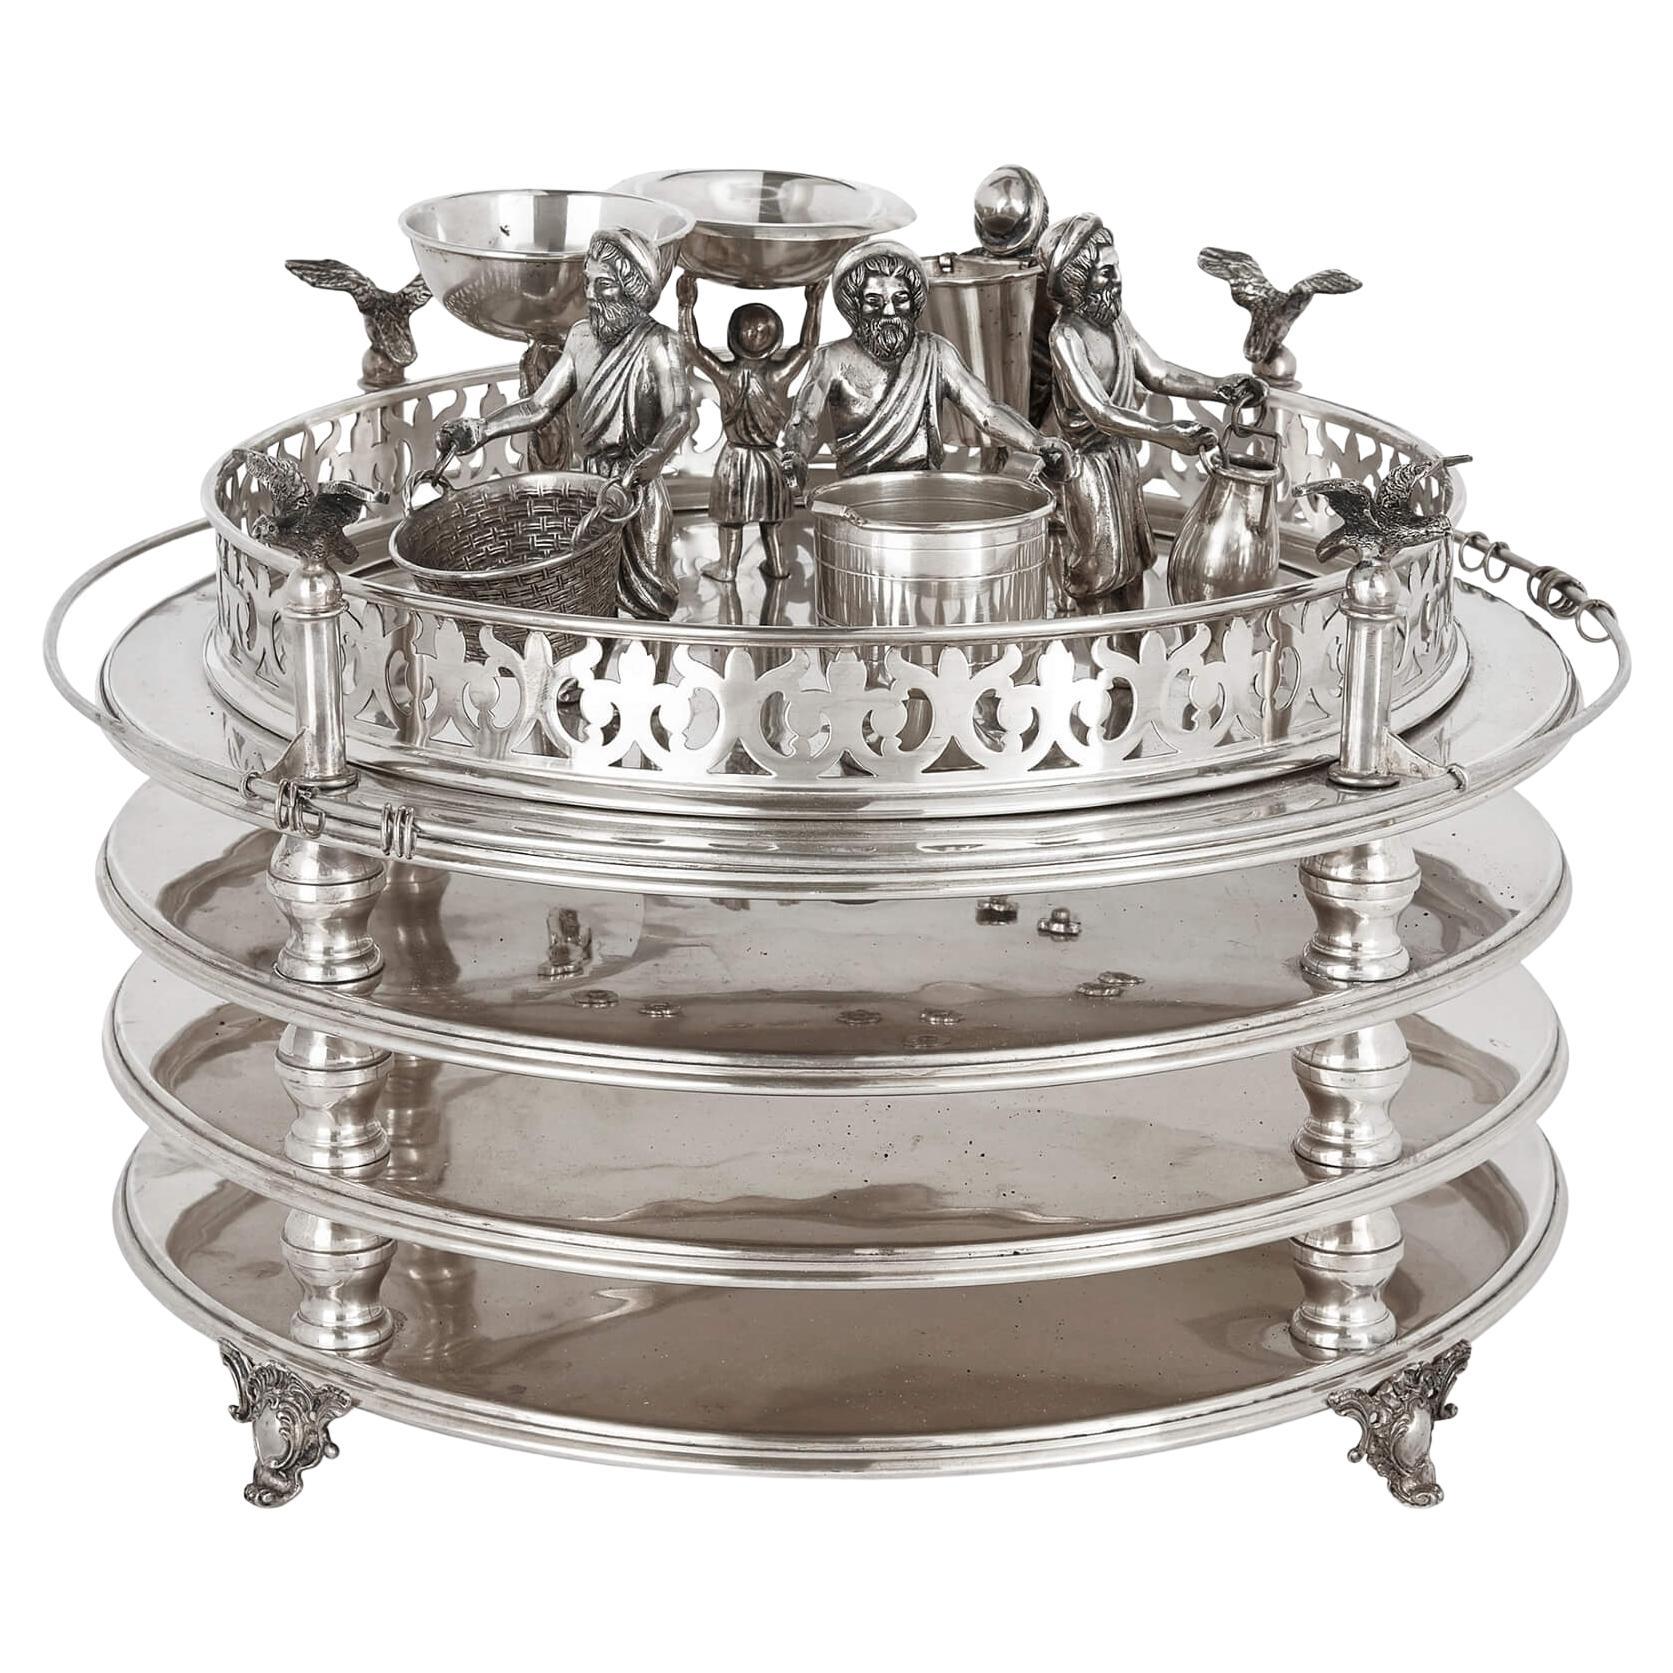 Silver Jewish Multi-Tiered Passover Seder Tray For Sale